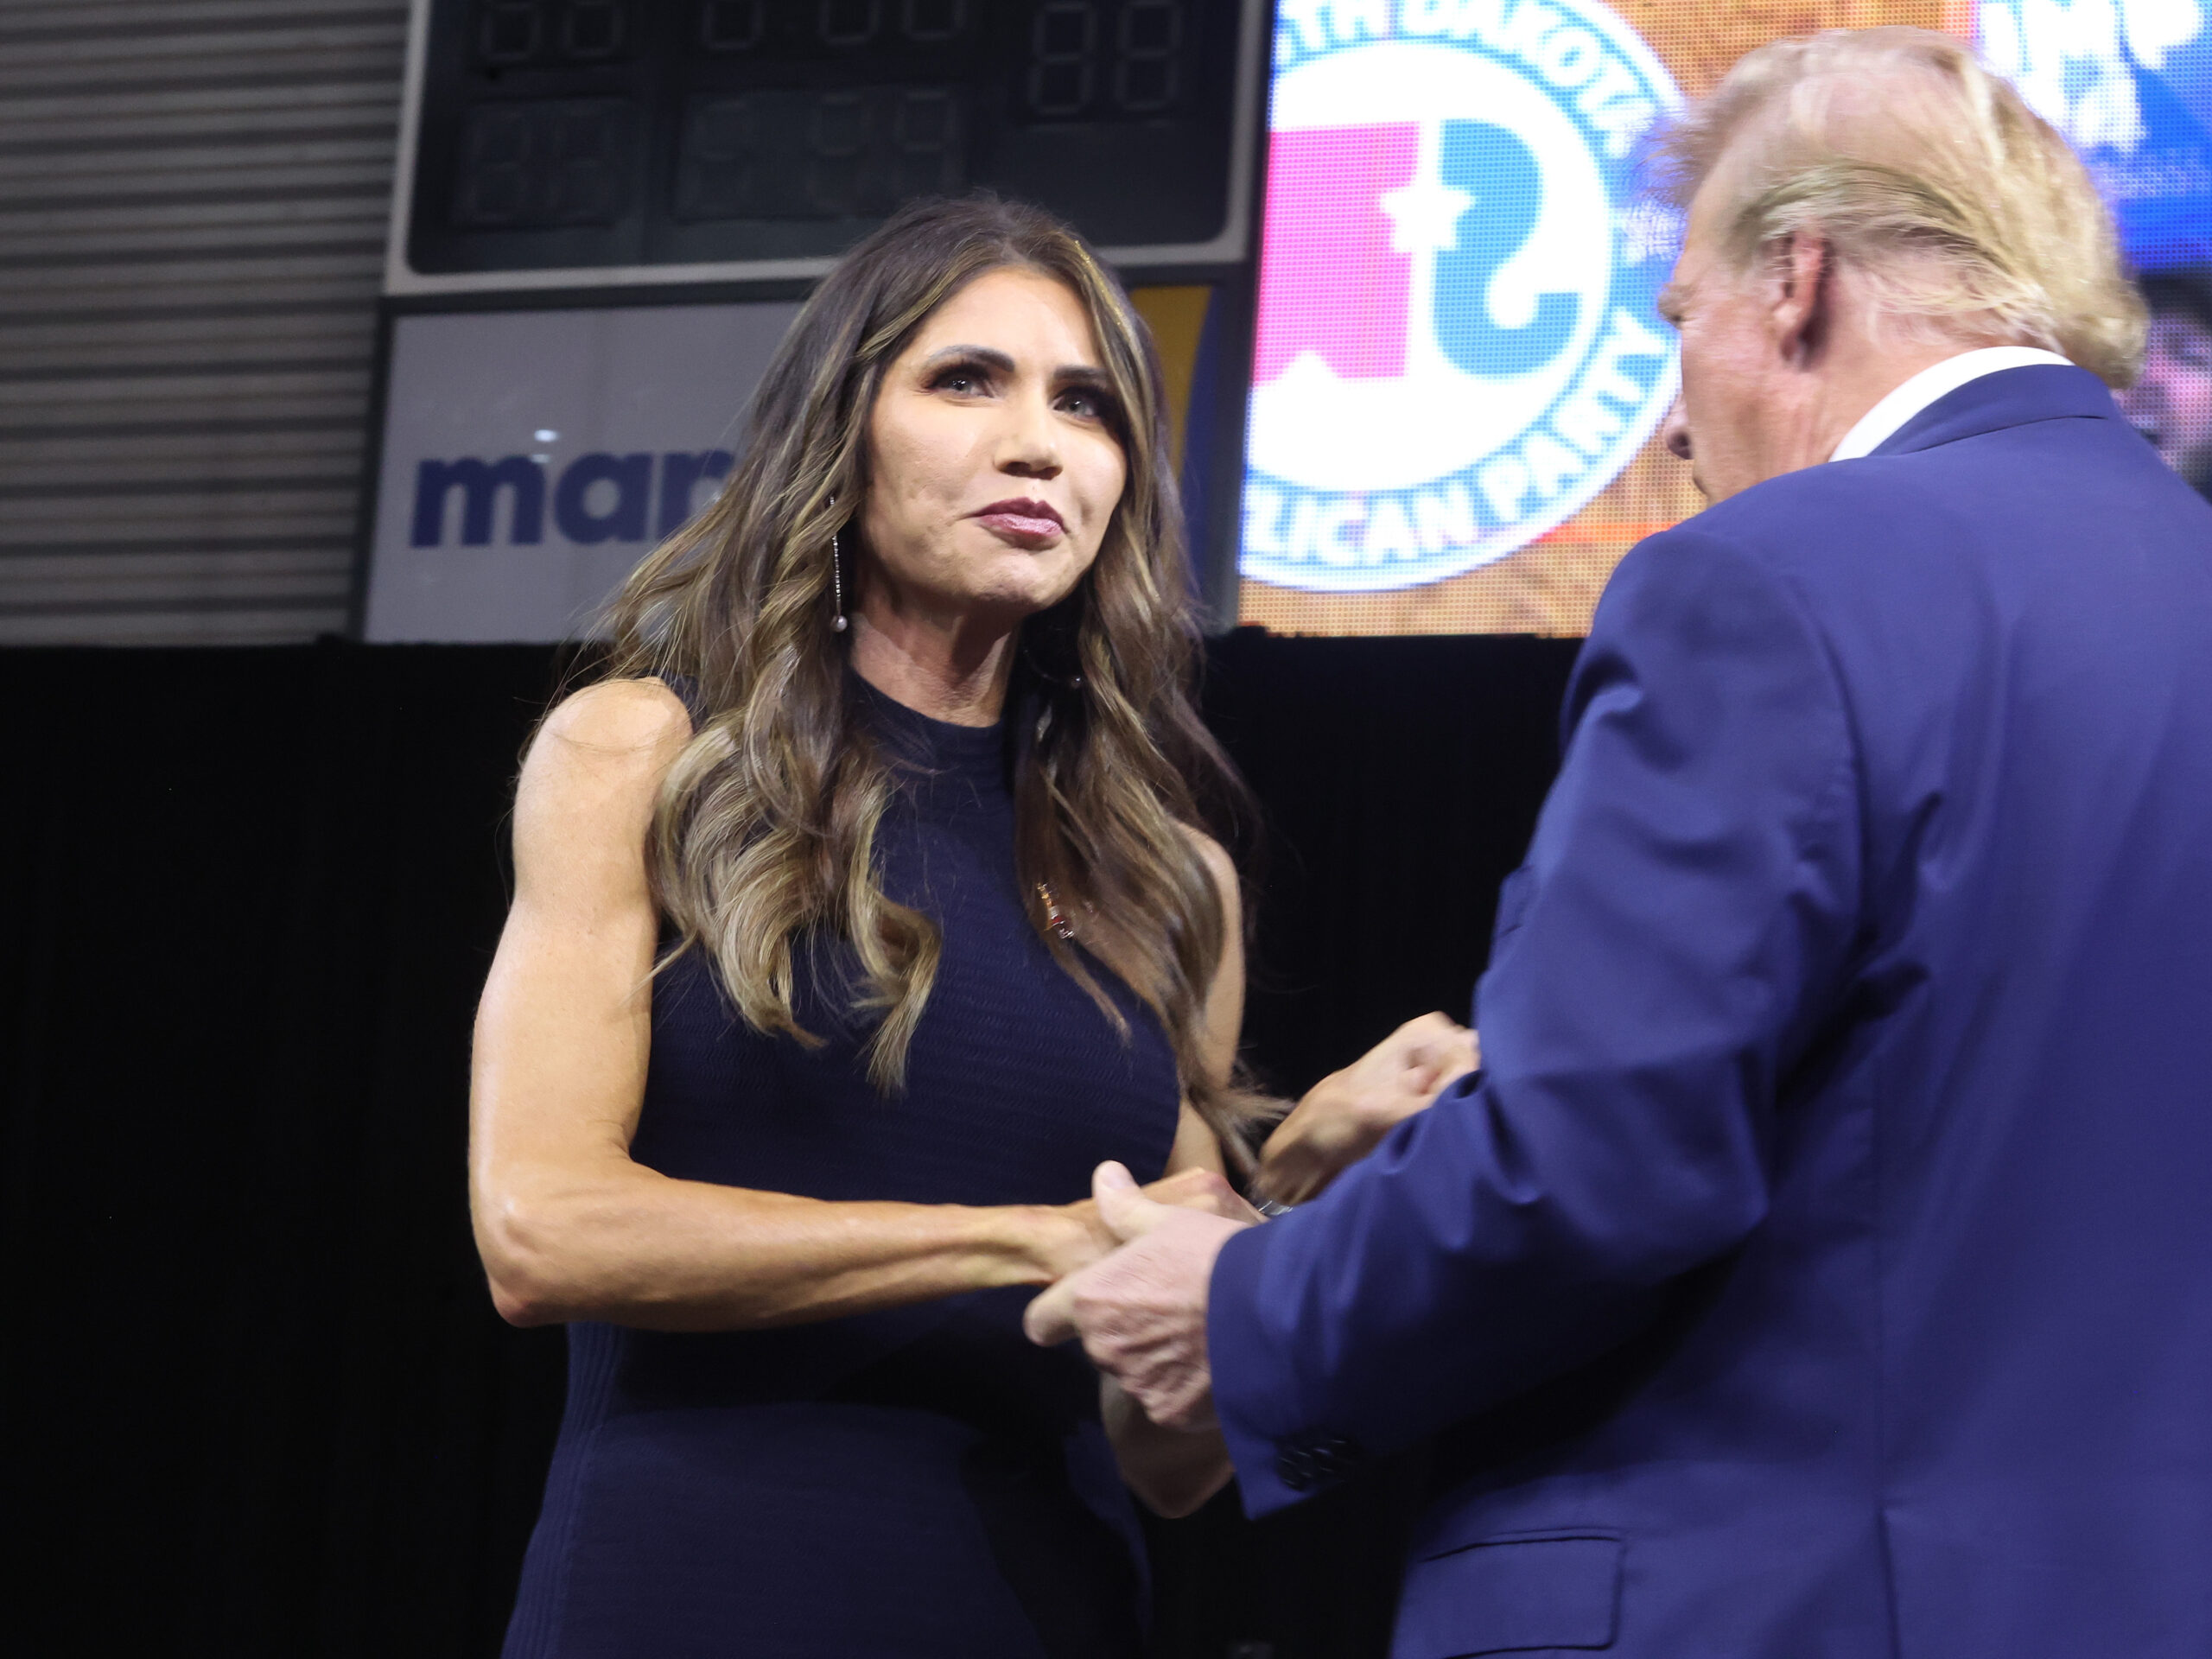 Former President Donald Trump greets South Dakota Gov. Kristi Noem at a rally hosted by the South Dakota Republican Party on Sept. 8 in Rapid City, S.D.